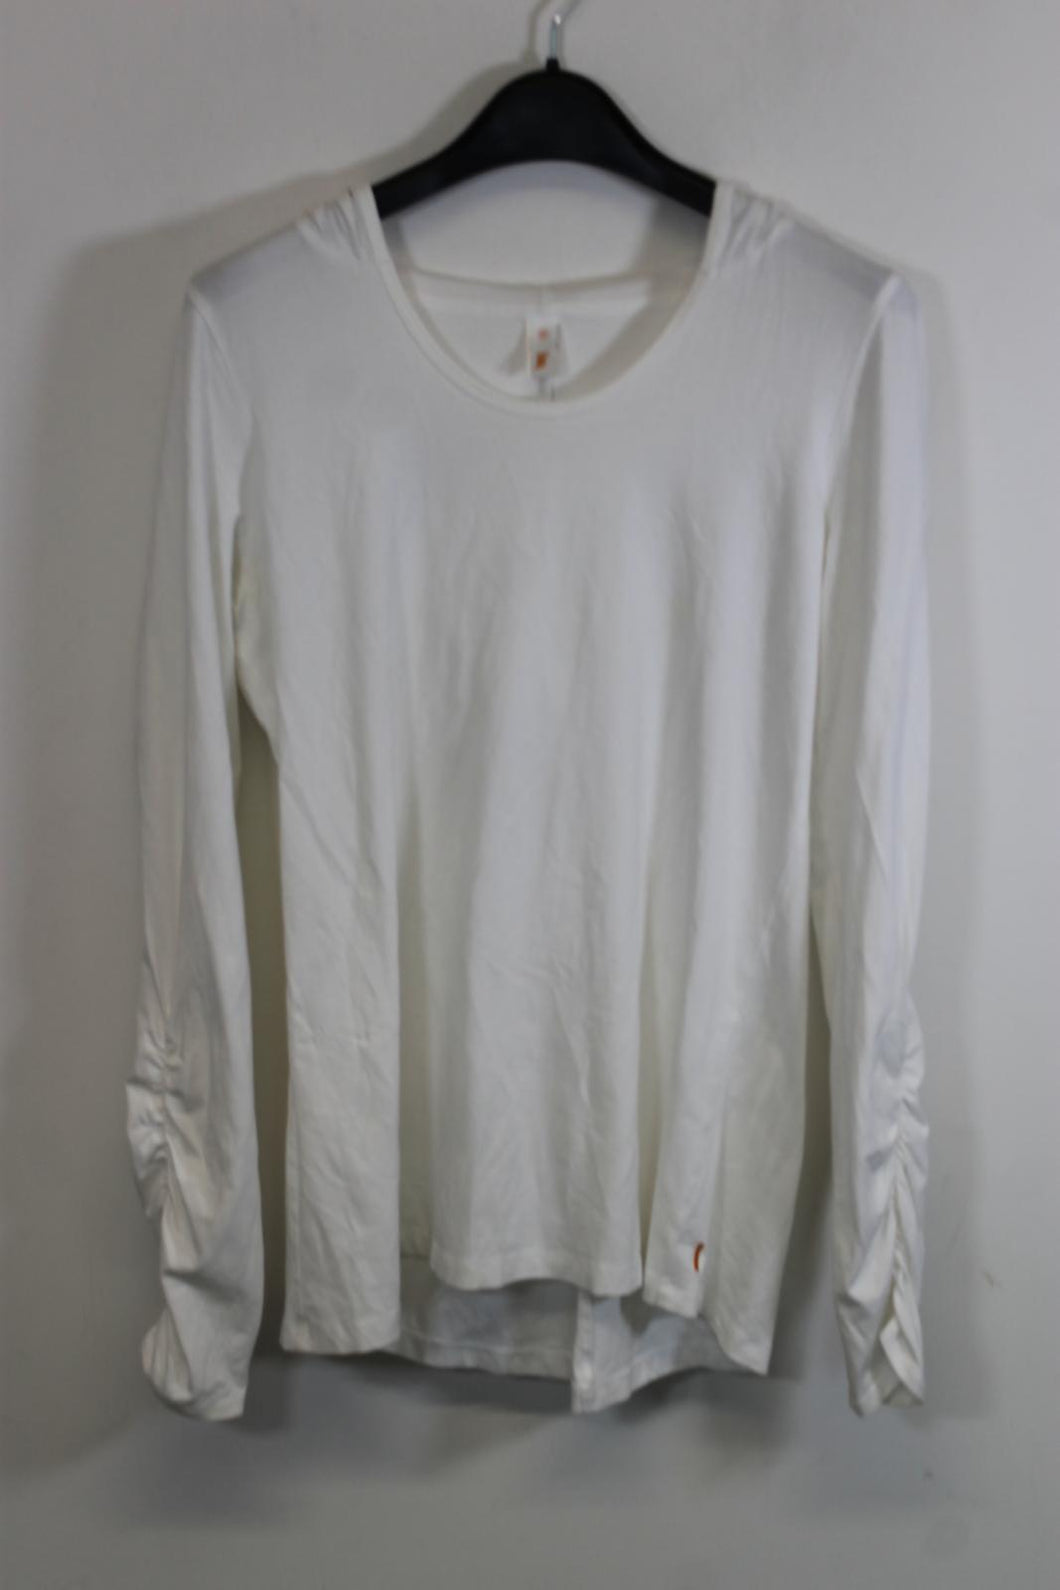 LUCY Ladies White Cotton Long Sleeve Hooded T-Shirt Top Size M